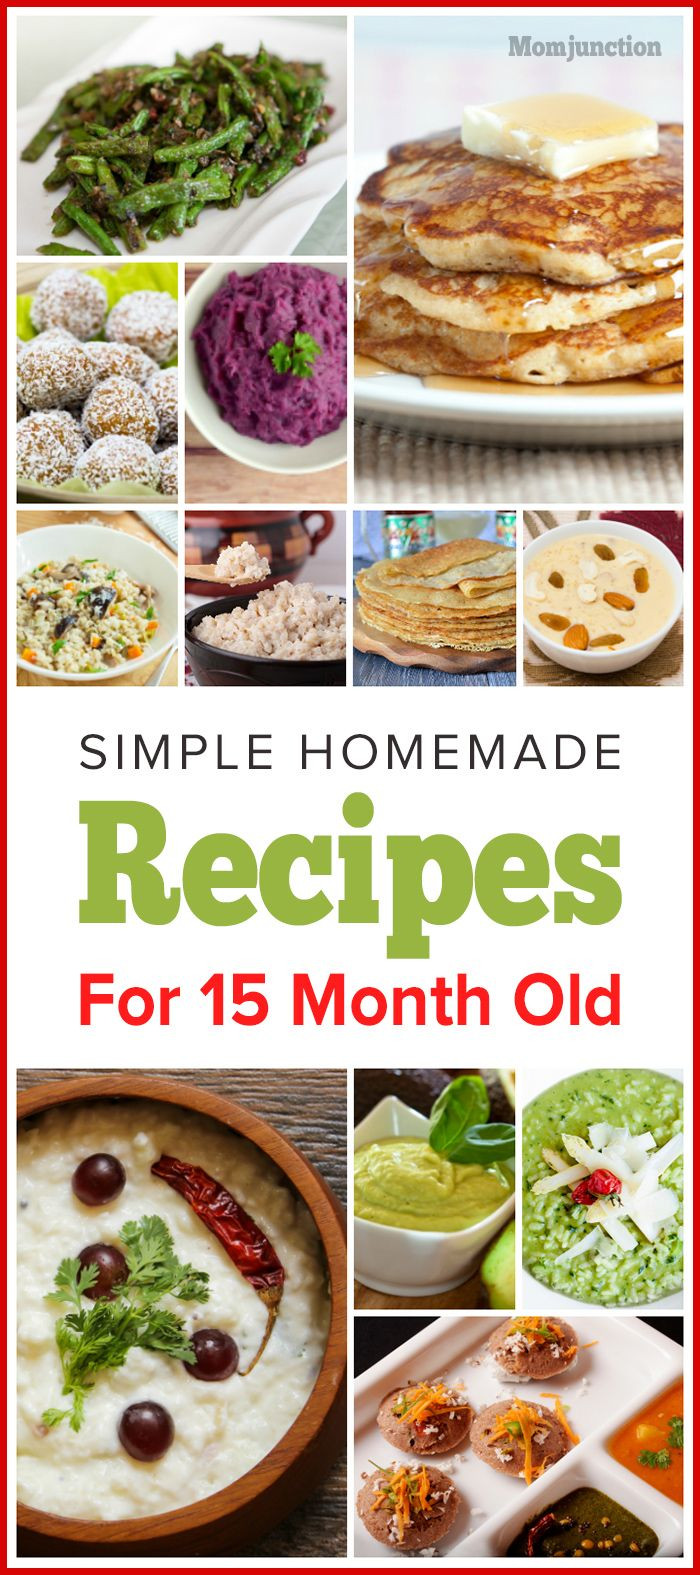 Recipes For One Year Old Baby
 Healthy And Interesting Food Ideas For 15 Month Olds